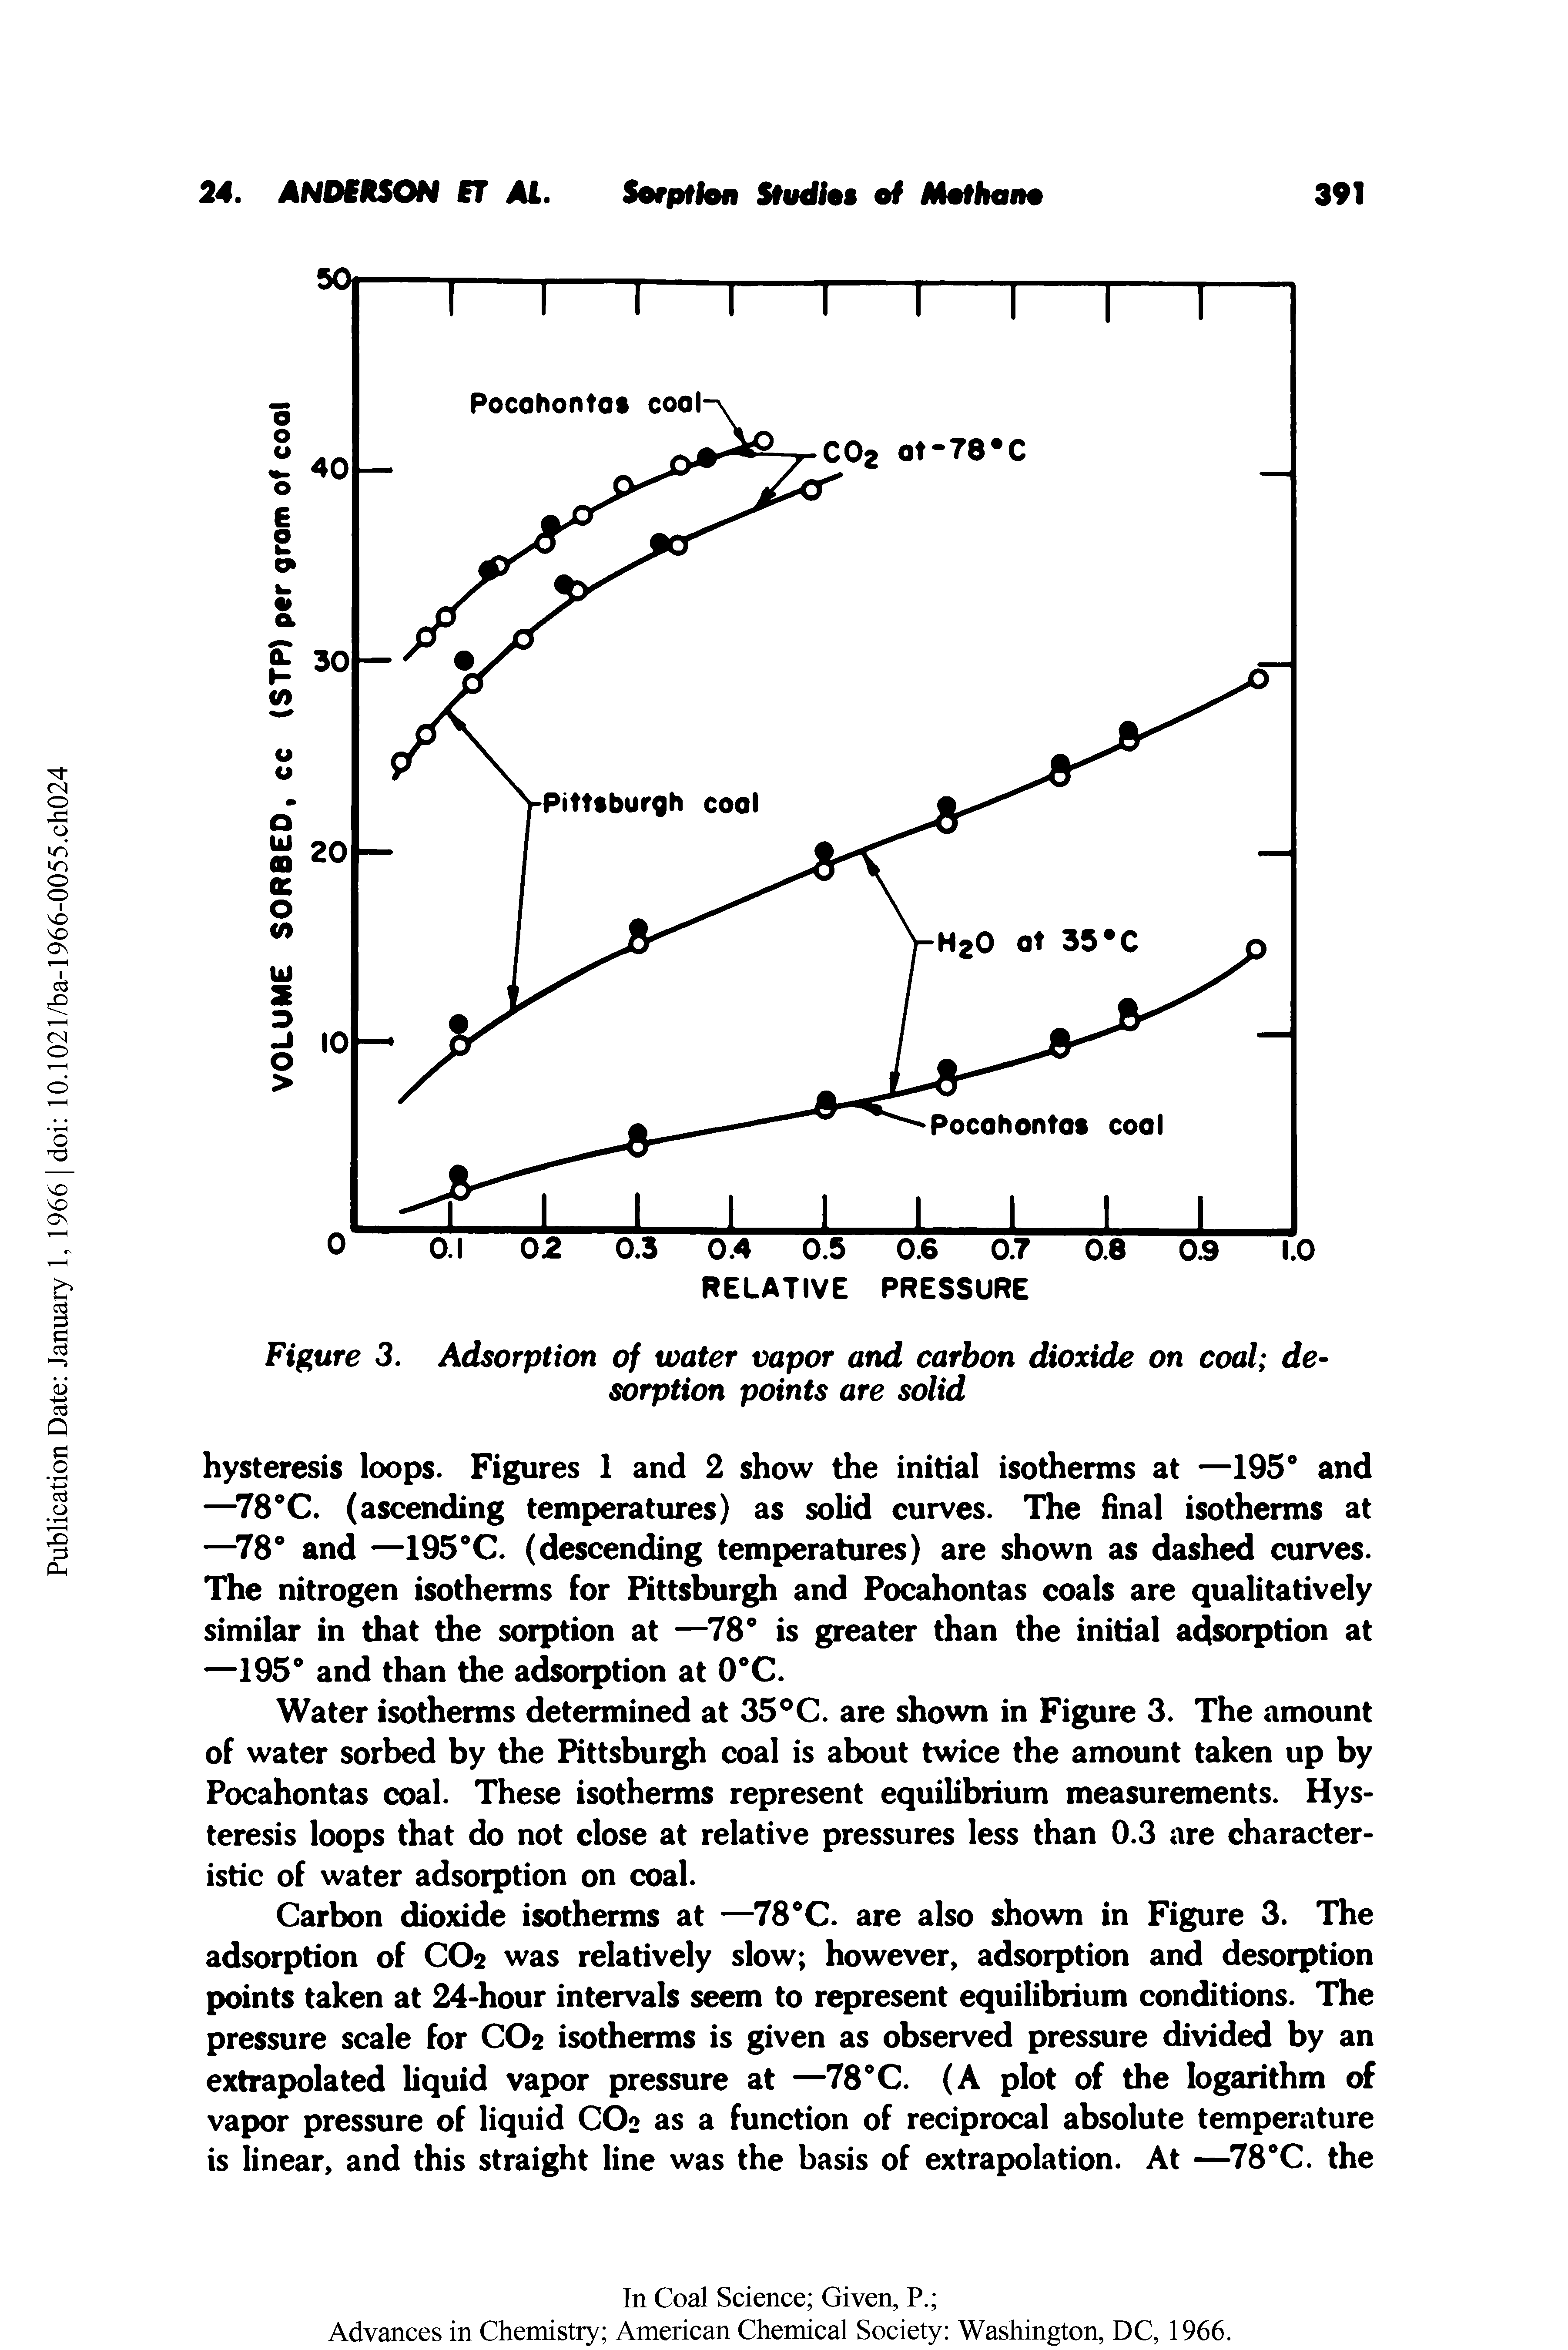 Figure 3. Adsorption of water vapor and carbon dioxide on coal desorption points are solid...